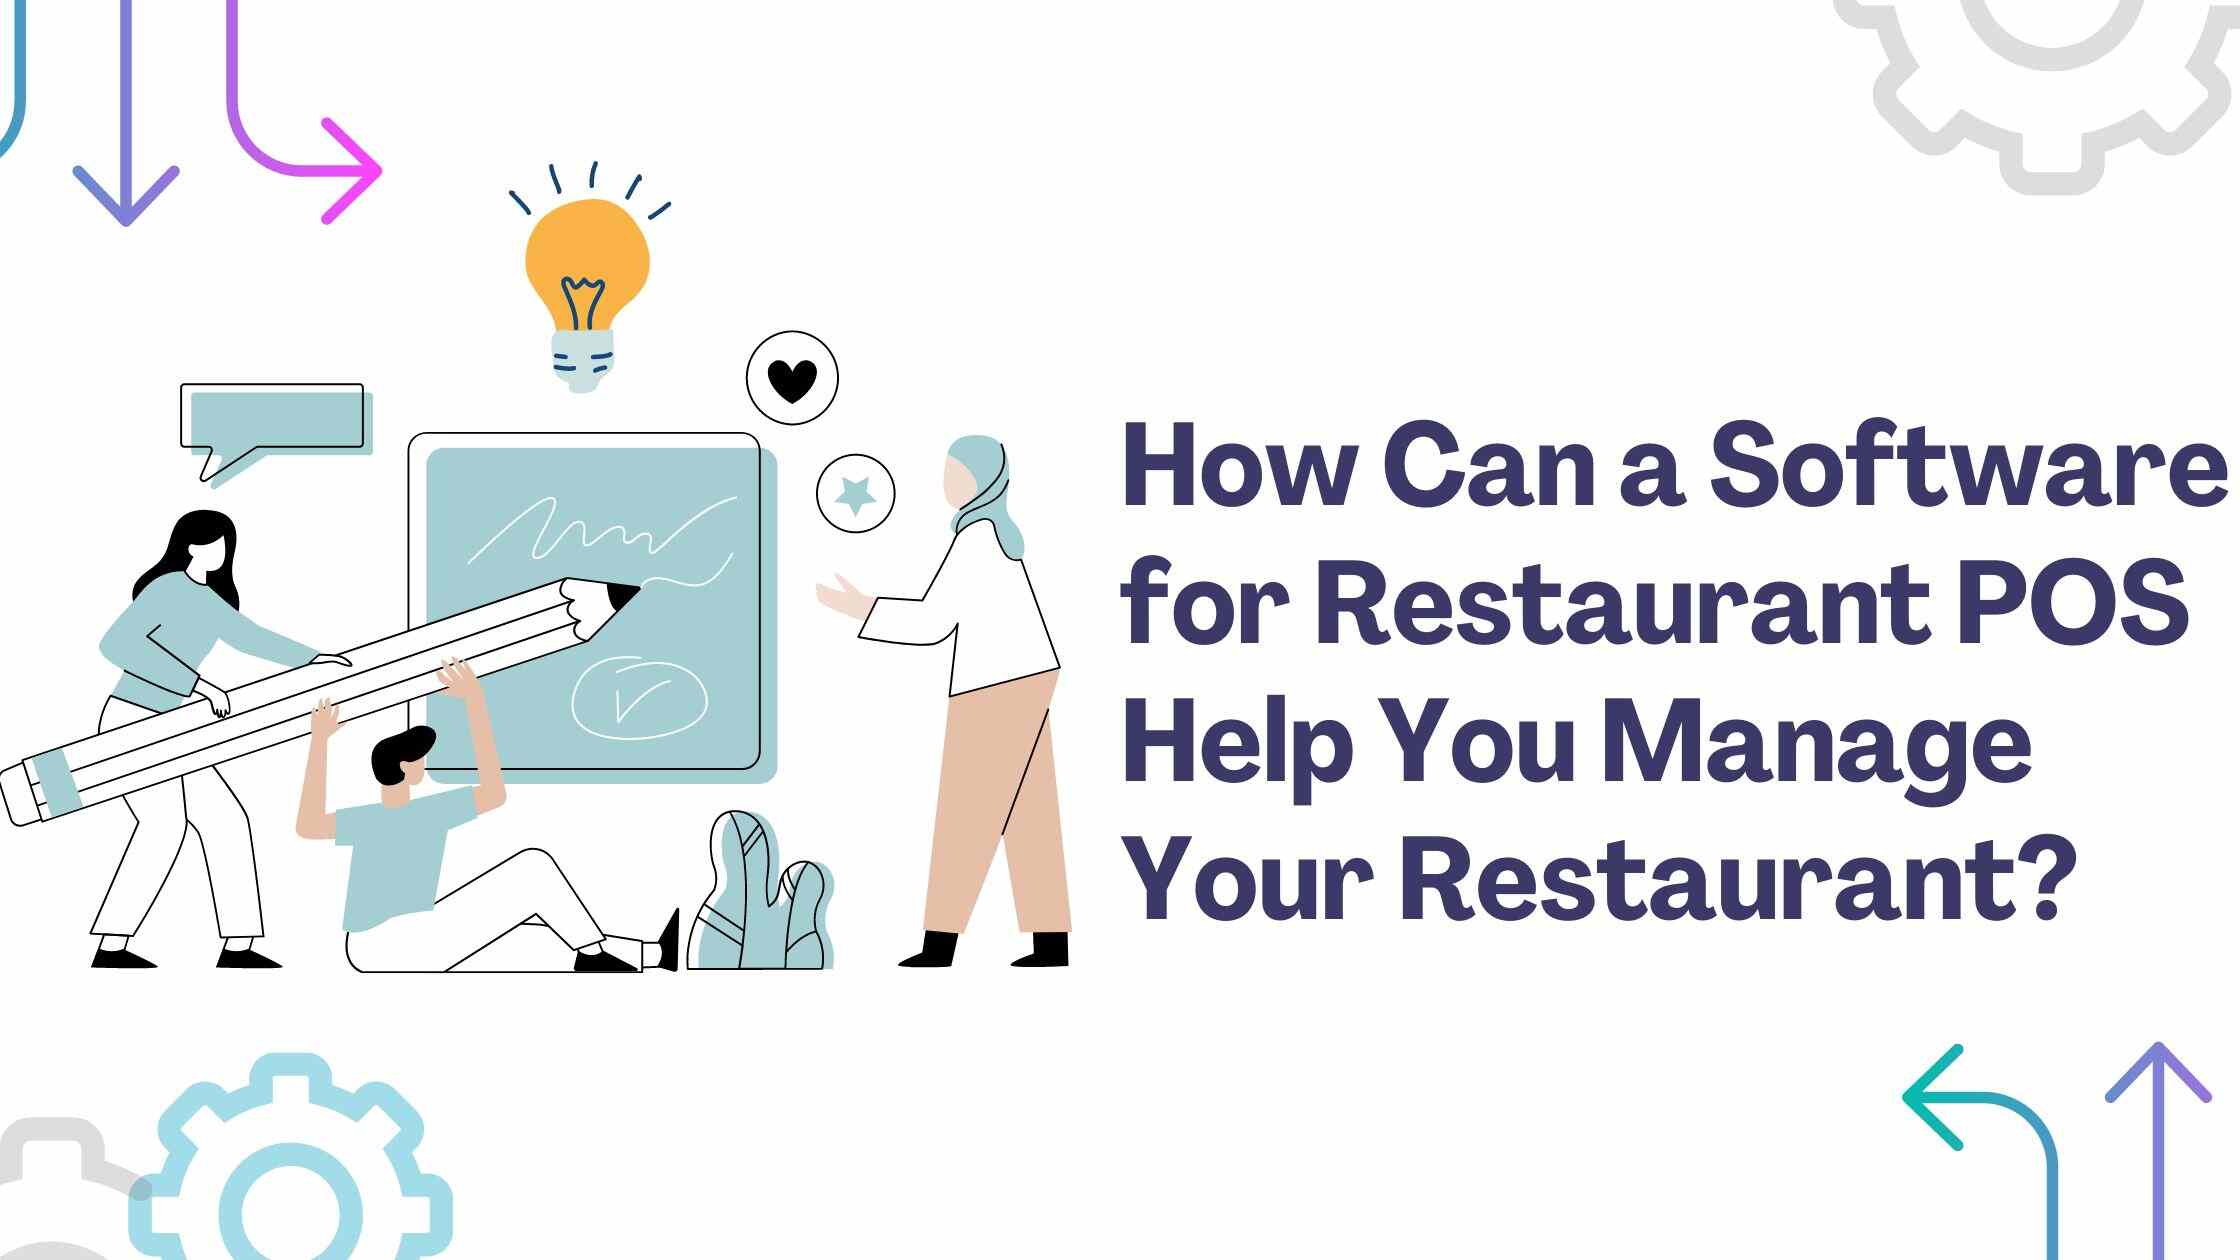 How Can a Software for Restaurant POS Help You Manage Your Restaurant?